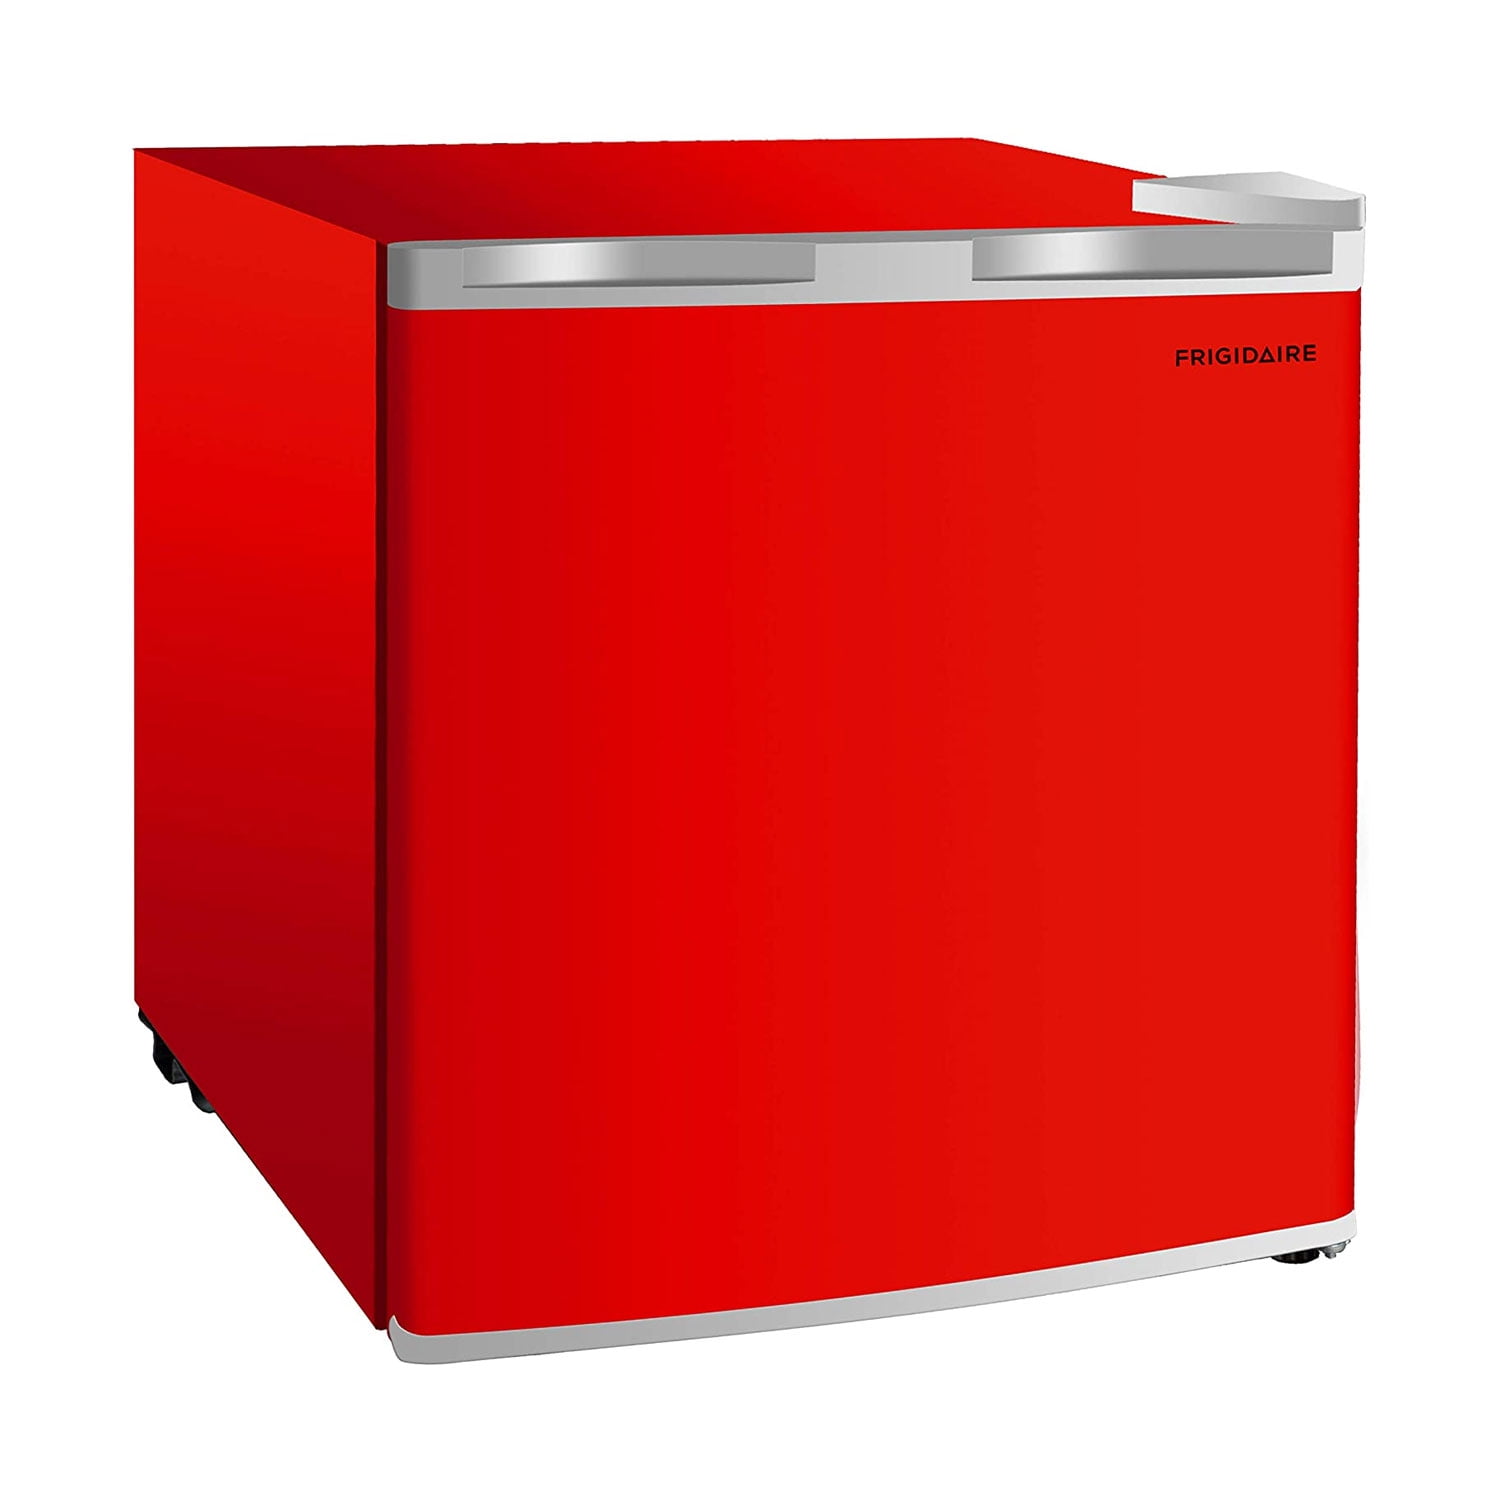 Frigidaire 7.5 Cu. Ft. Top Freezer Refrigerator in RED, Rounded Corners -  RETRO, EFR756